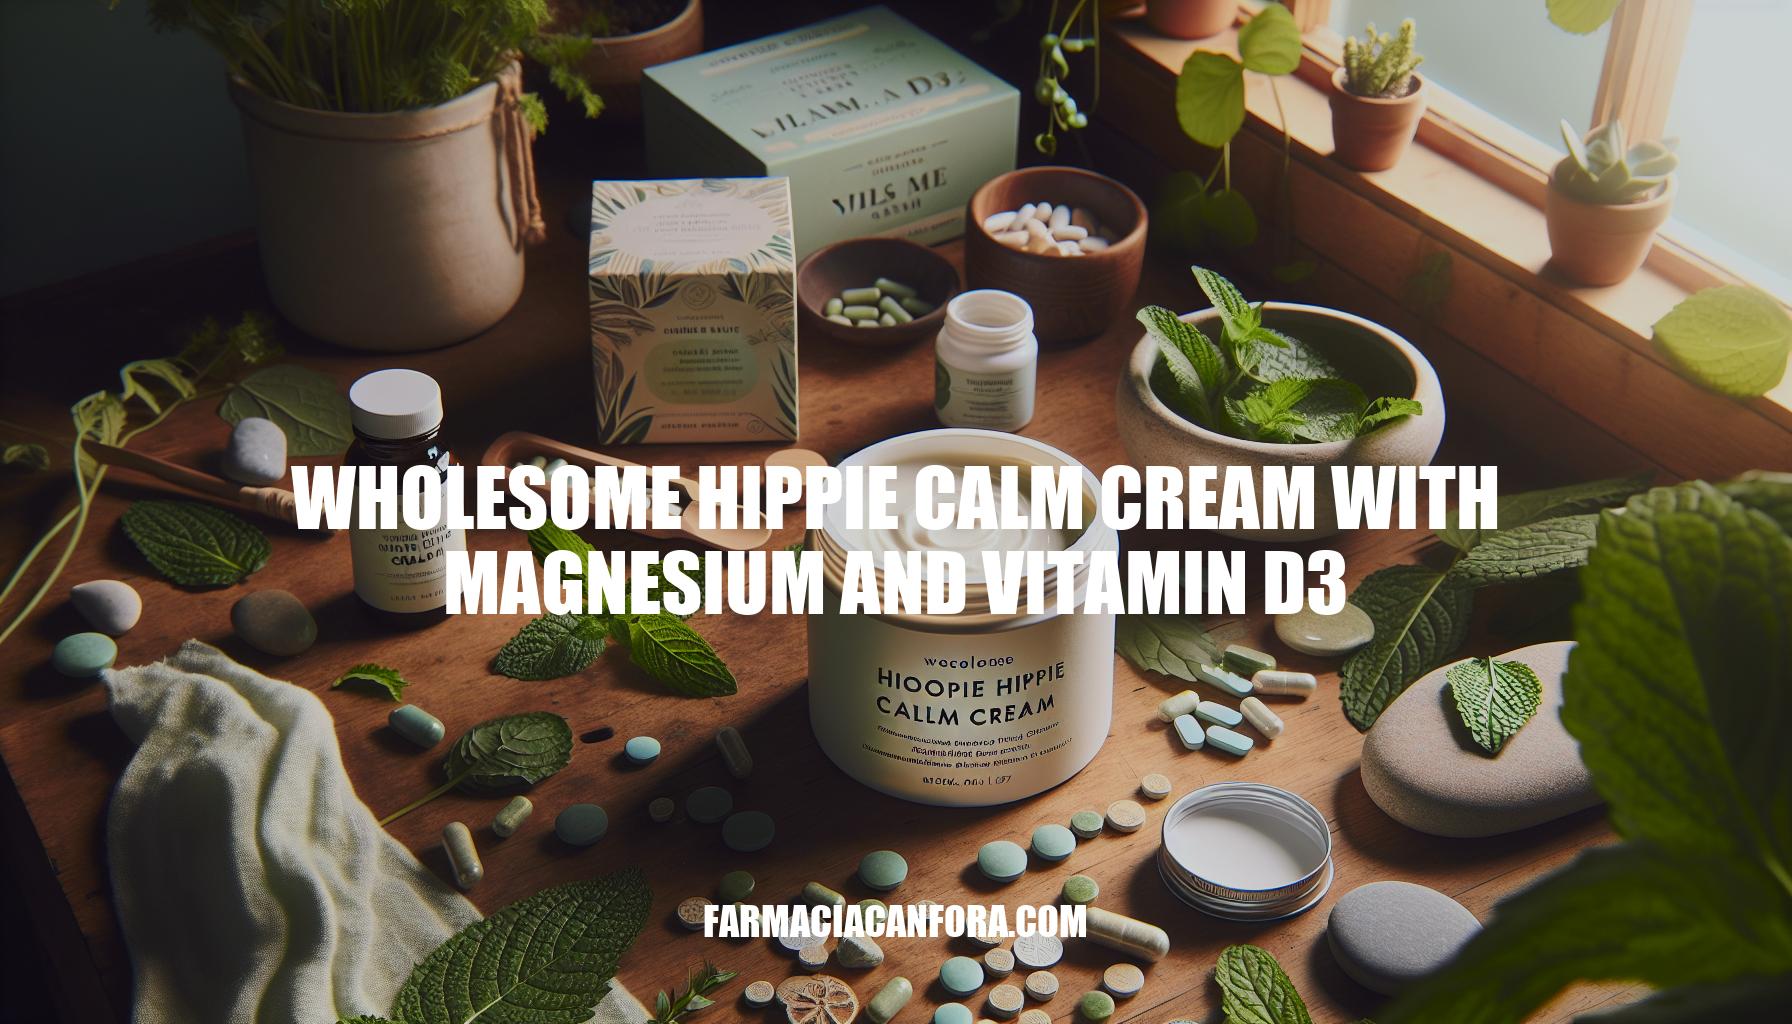 Wholesome Hippie Calm Cream with Magnesium and Vitamin D3: The Ultimate Holistic Wellness Product